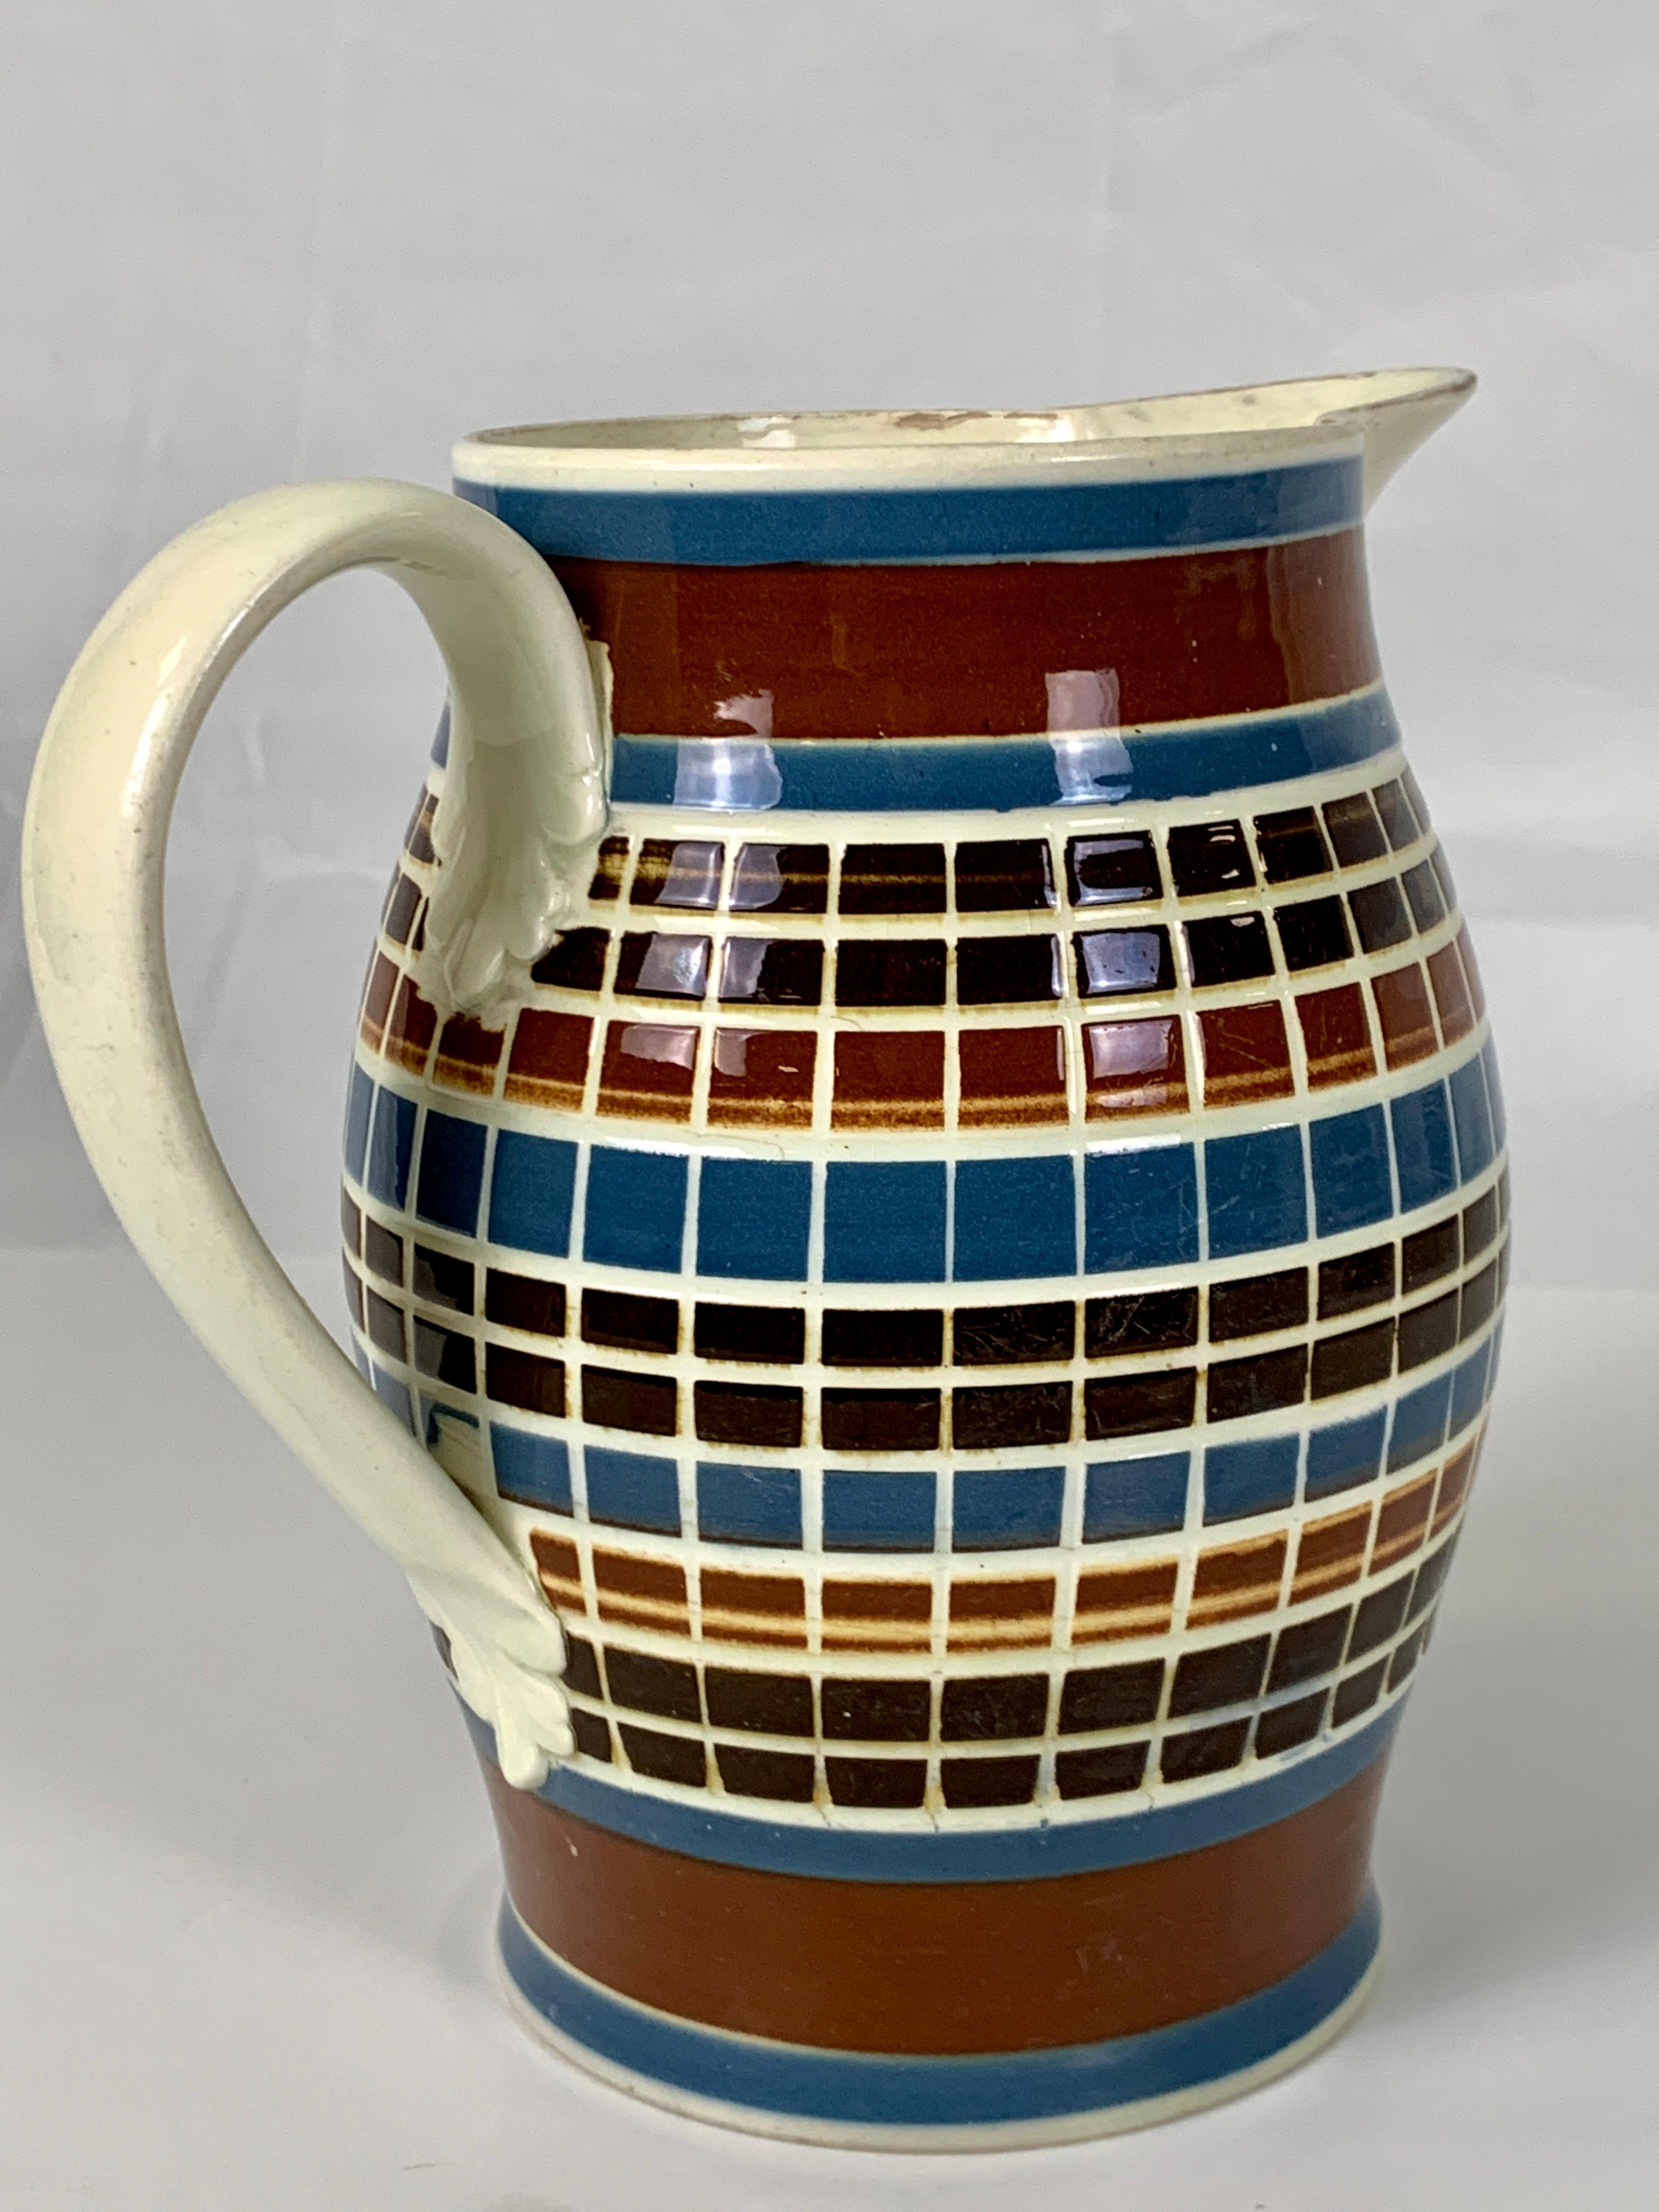 19th Century Early Mochaware Pitcher Cut Through the Colored Slip Made in England, circa 1800